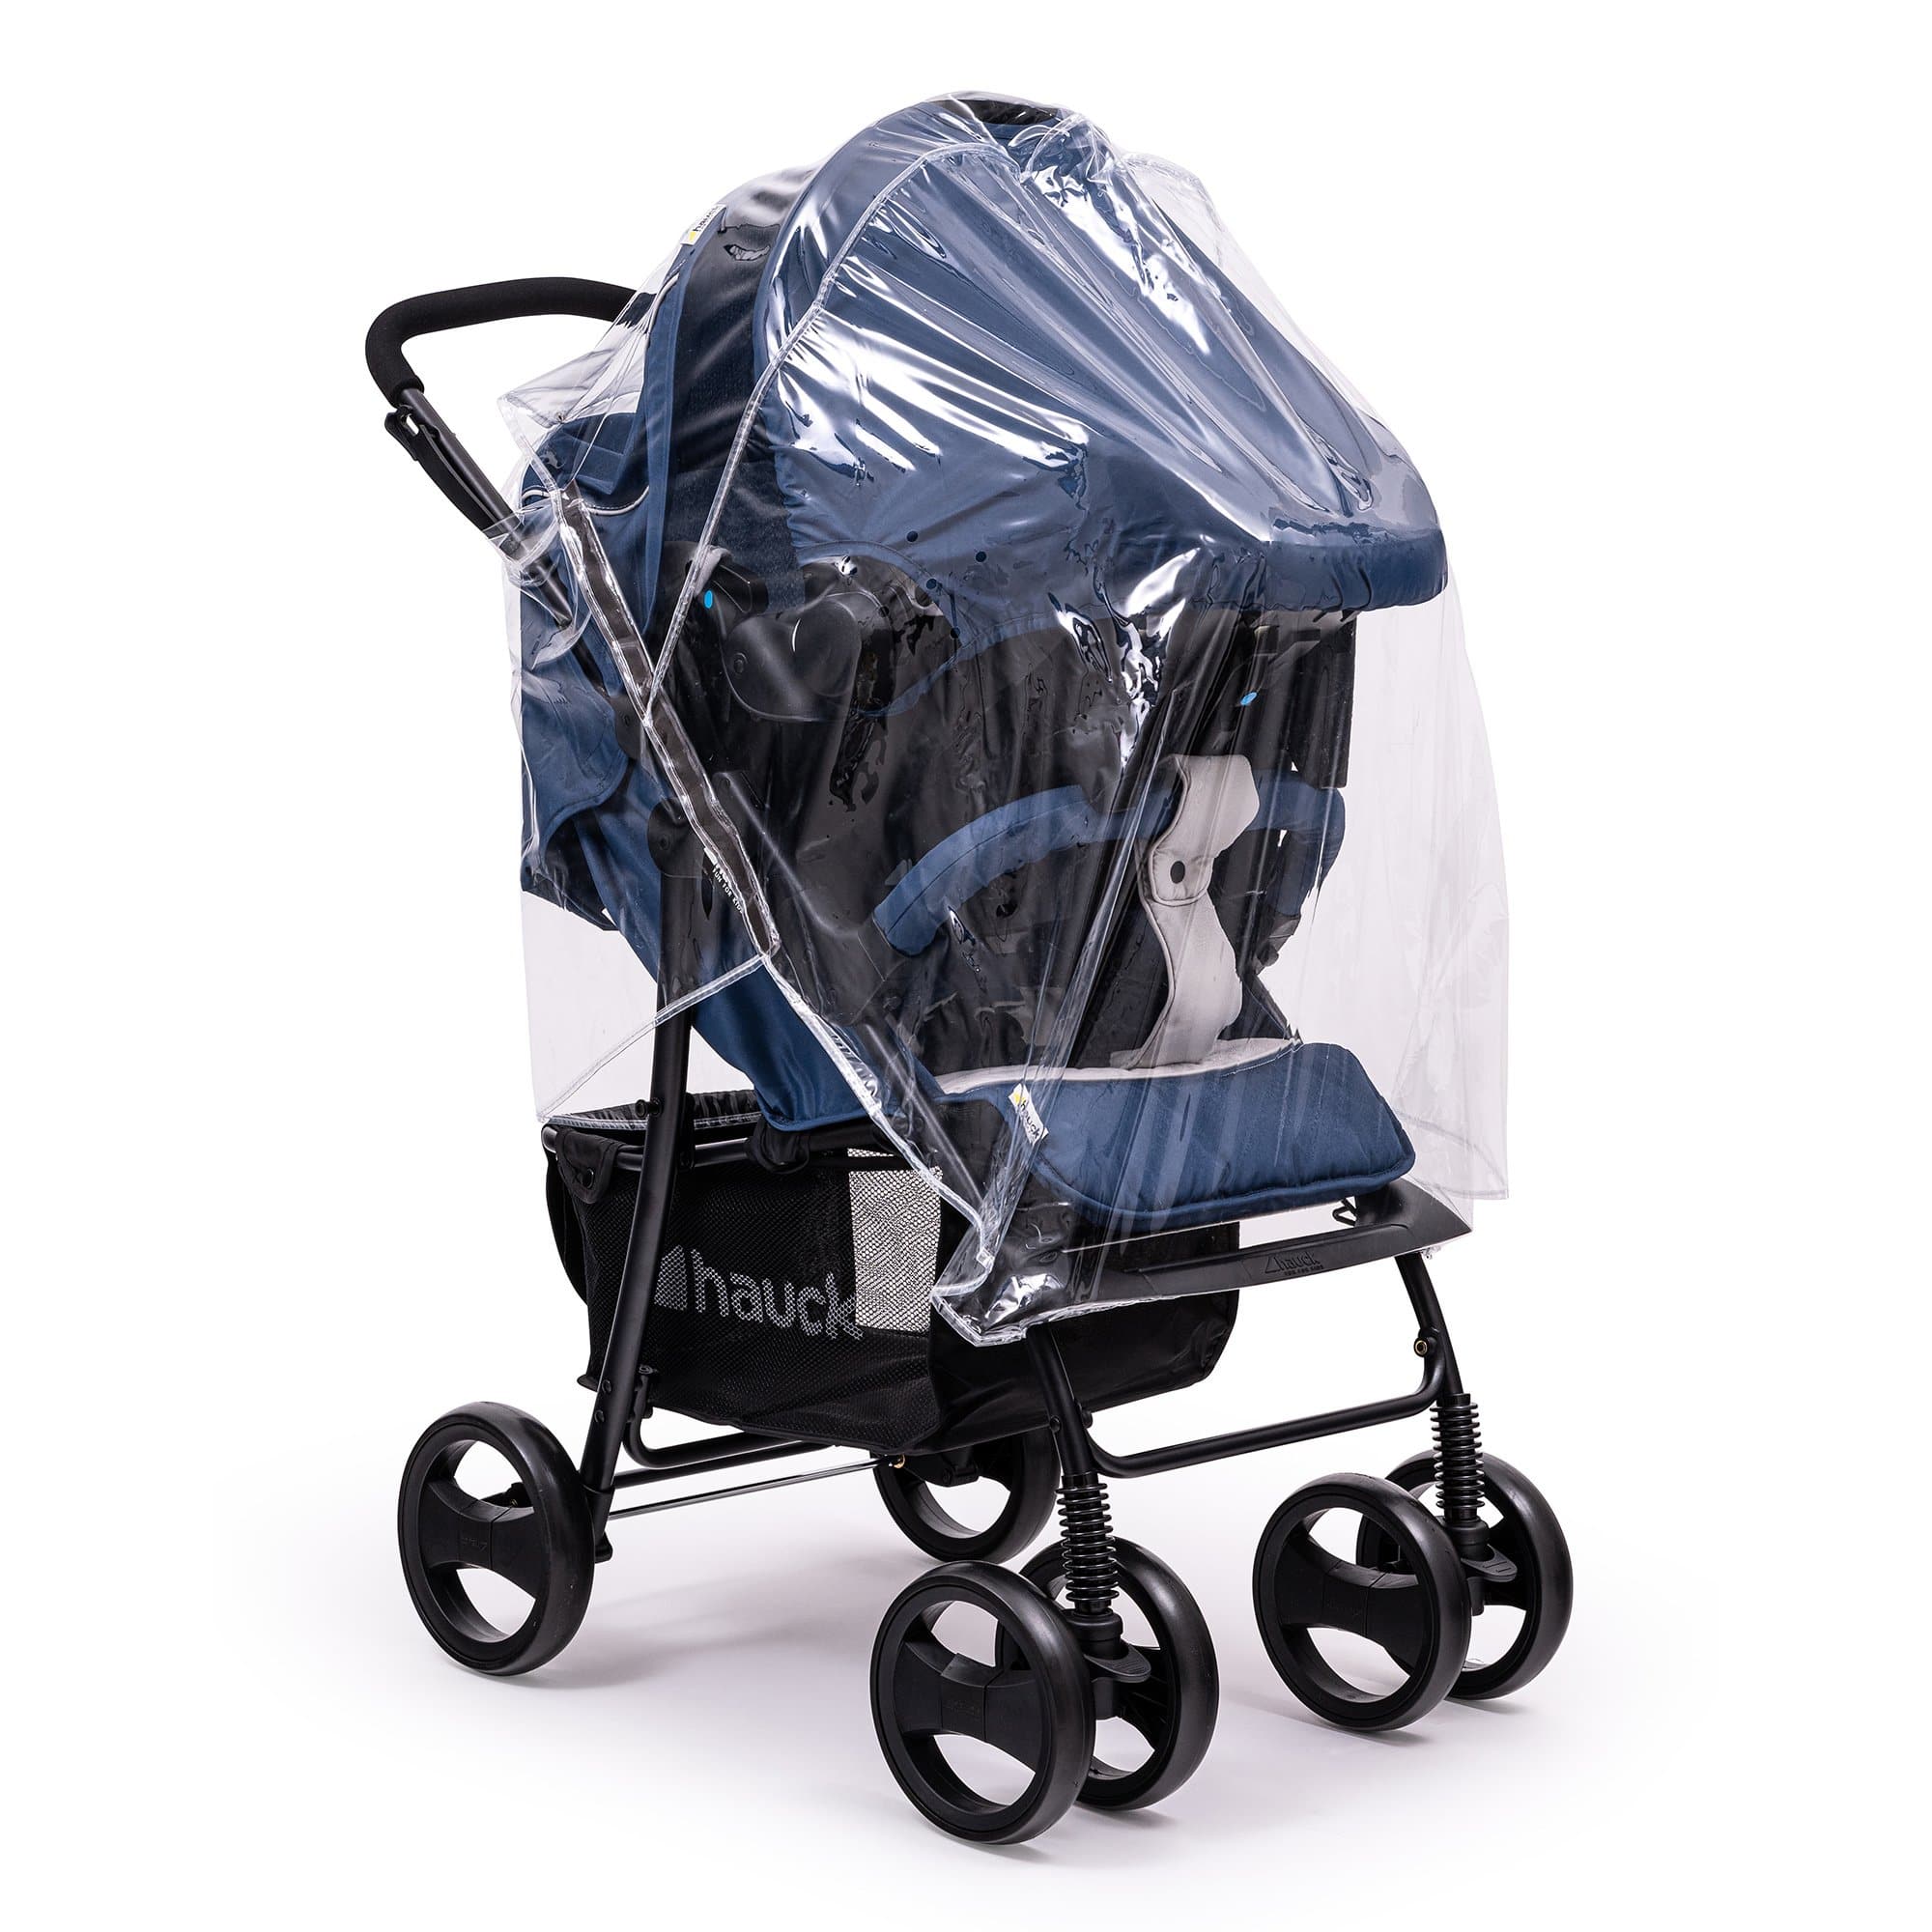 Universal Travel System Raincover - Fits All Models - For Your Little One